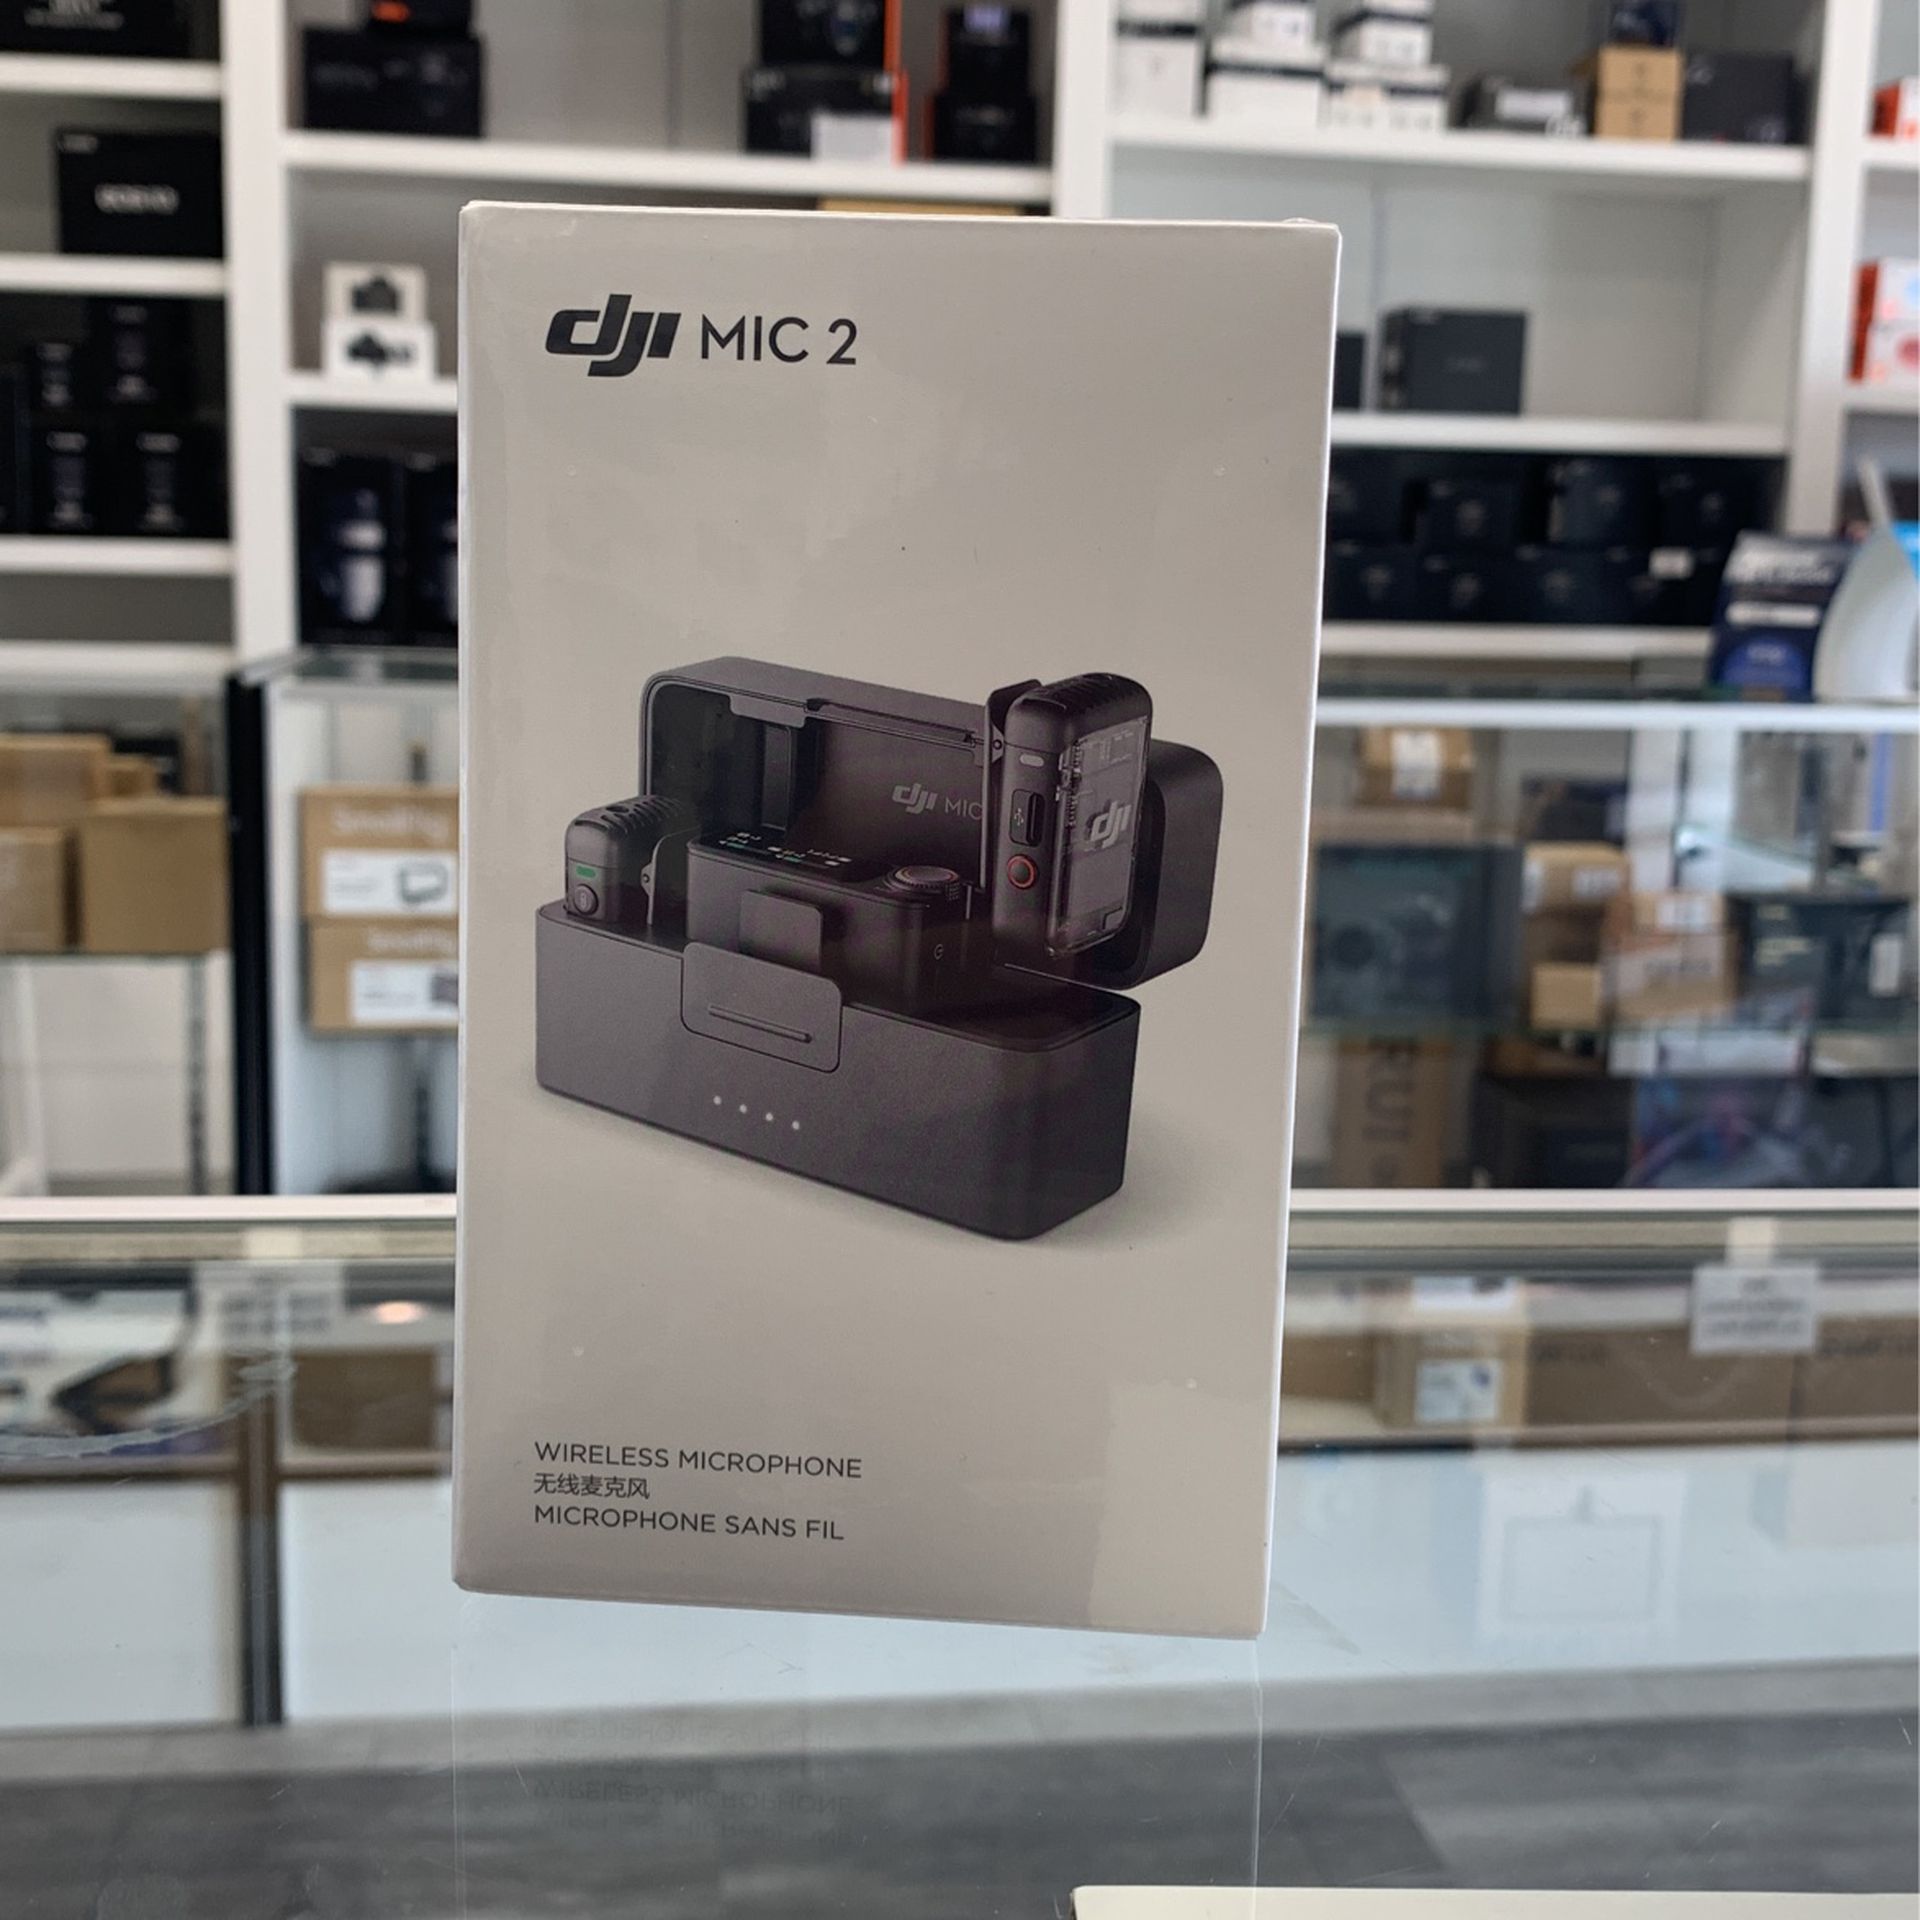 Camera and Computer Store Located in Corona, CA.   We Carry a Large Selection of Apple Products, Cameras, Lighting, and Drones. 💻  Ask about our No C